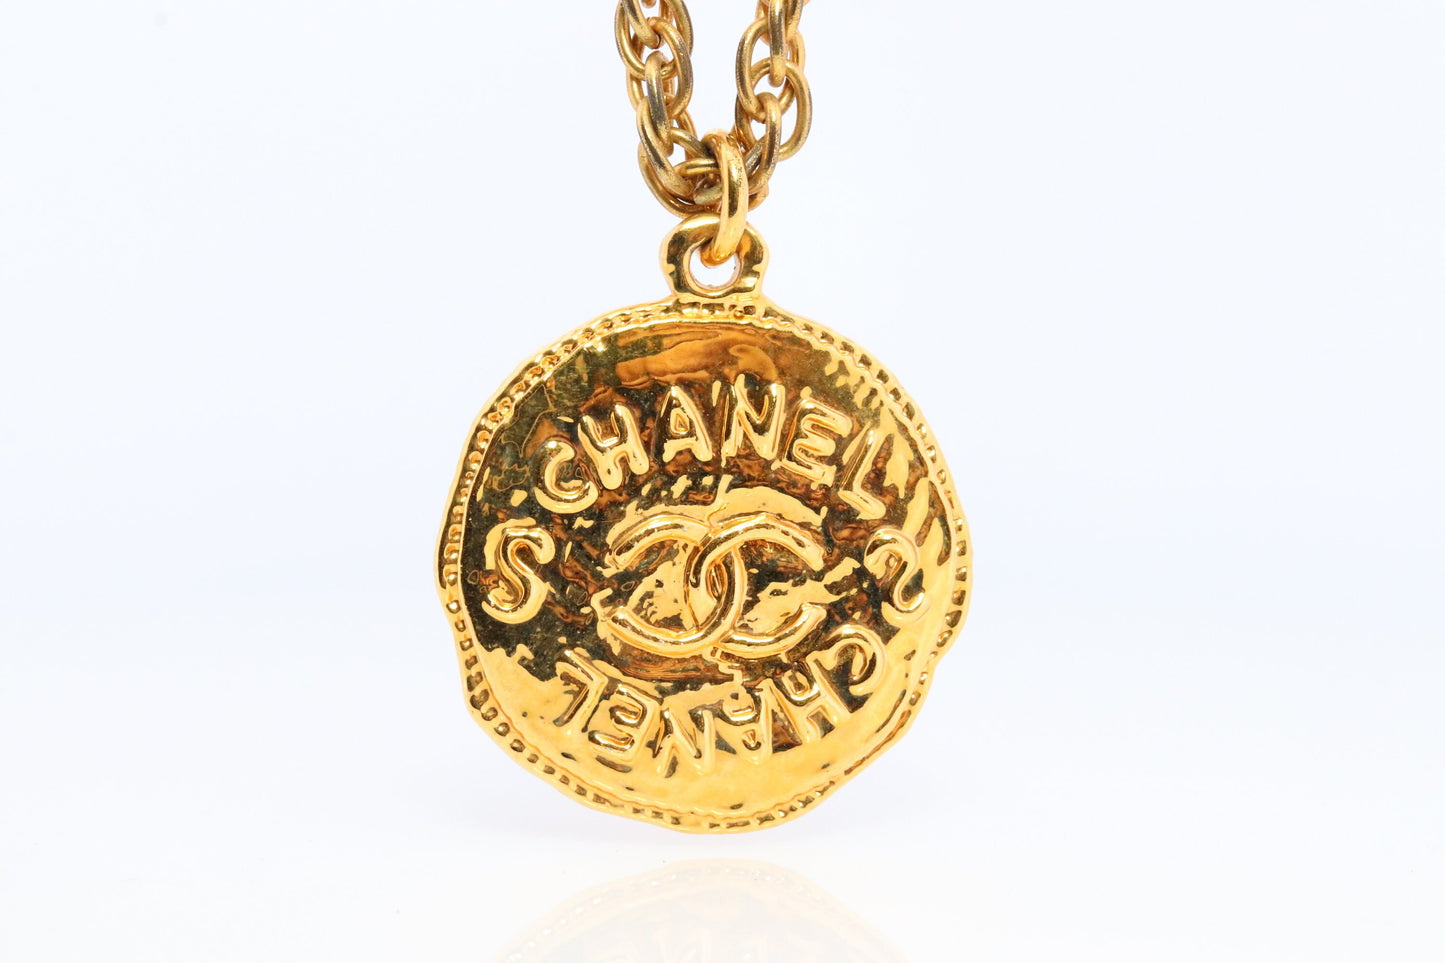 Chanel Necklace. Genuine CC CHANEL Round LOGO Coin Necklace. Disc Medallion Necklace. byzantine Etruscan Hammered Coco Chanel Necklace